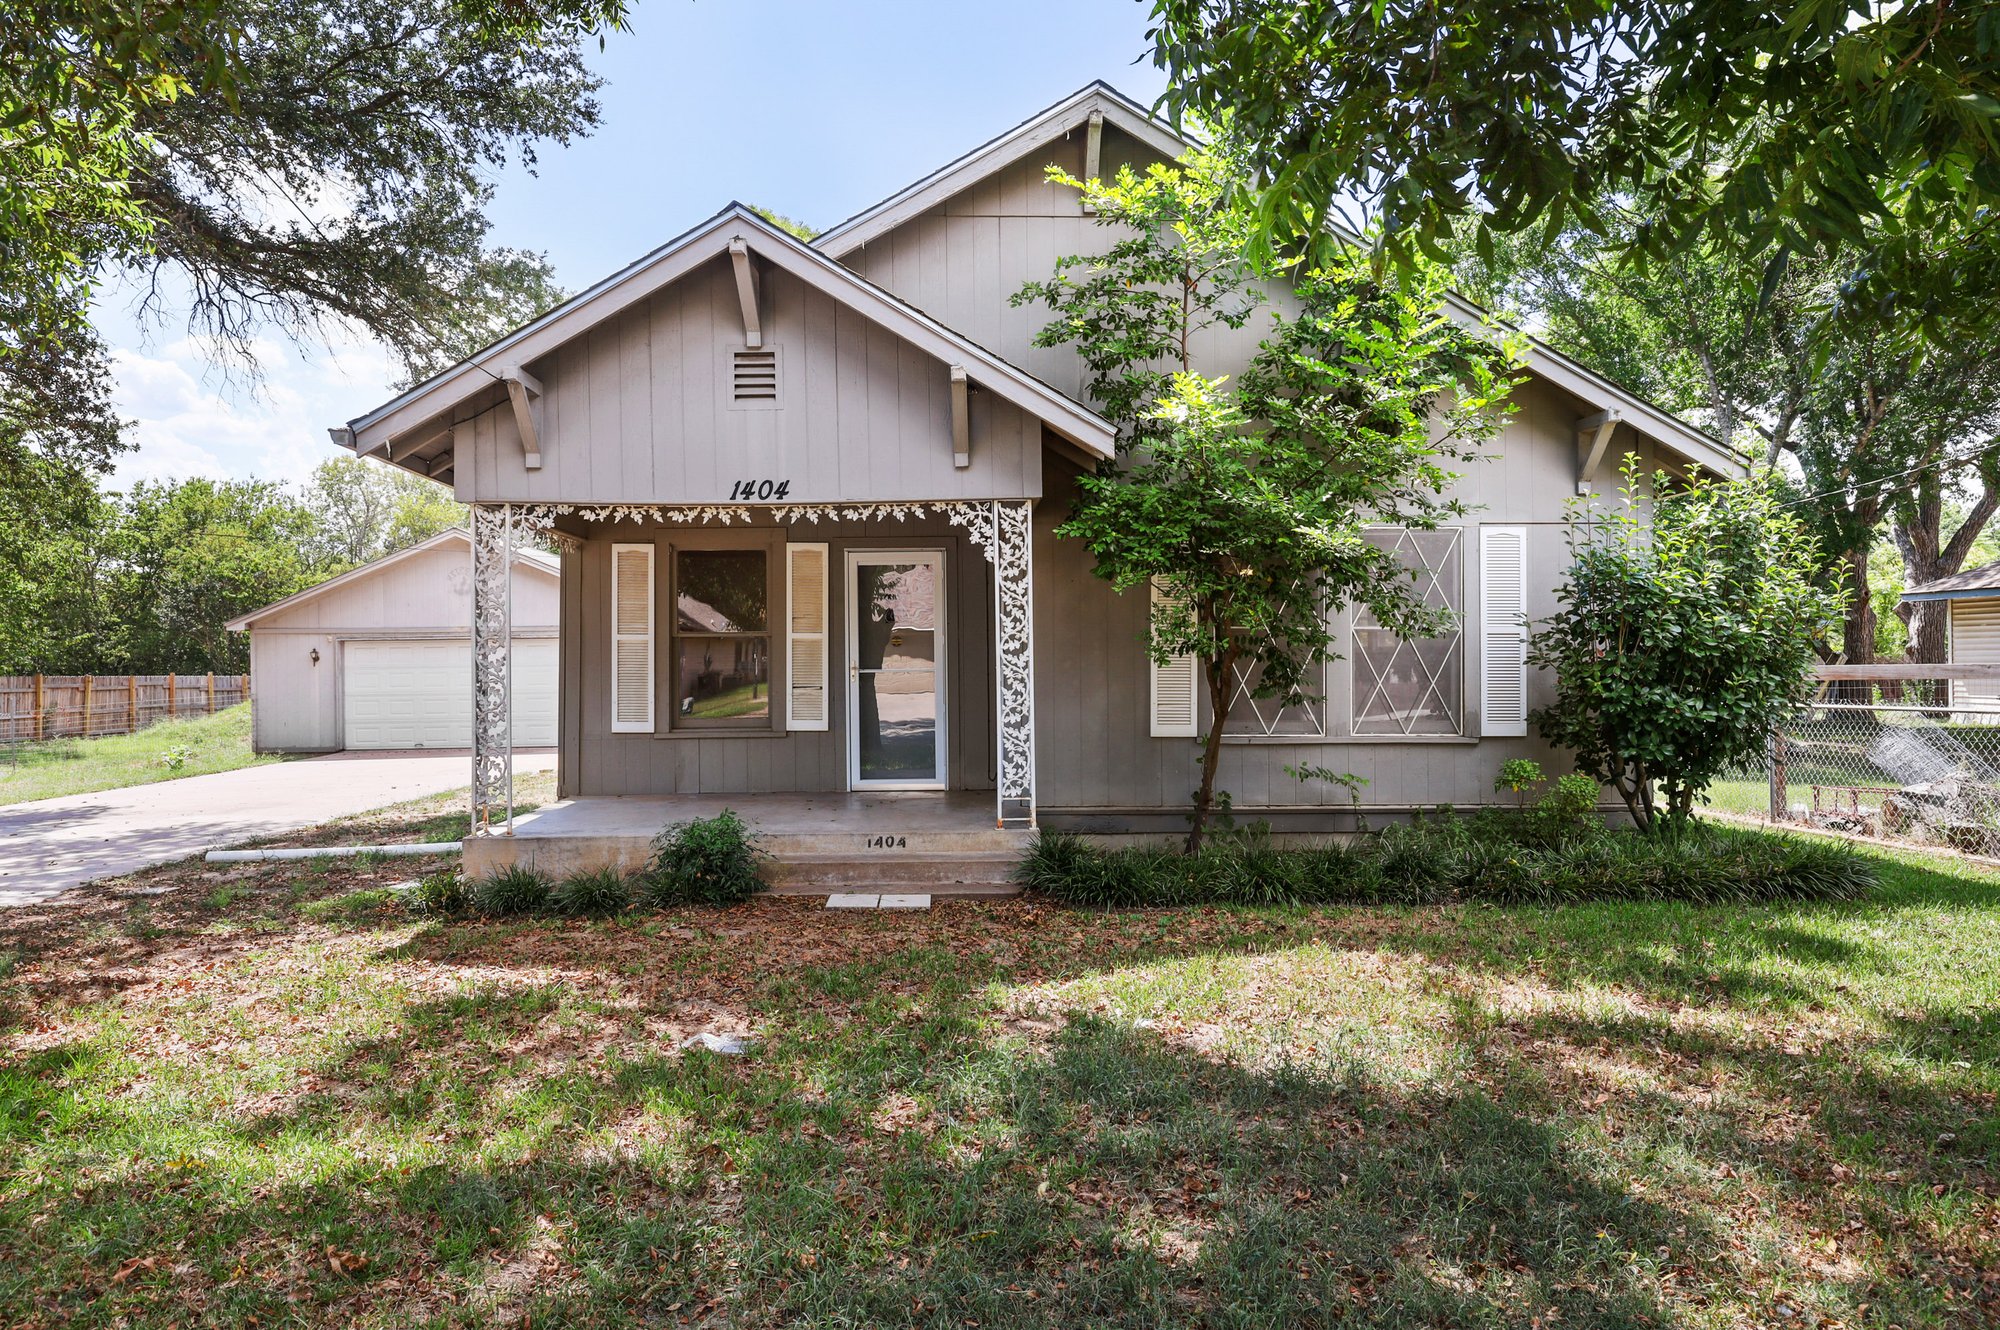 Photo 1 of 30 - 1404 Stanwood Ave, Cleburne, TX 76033